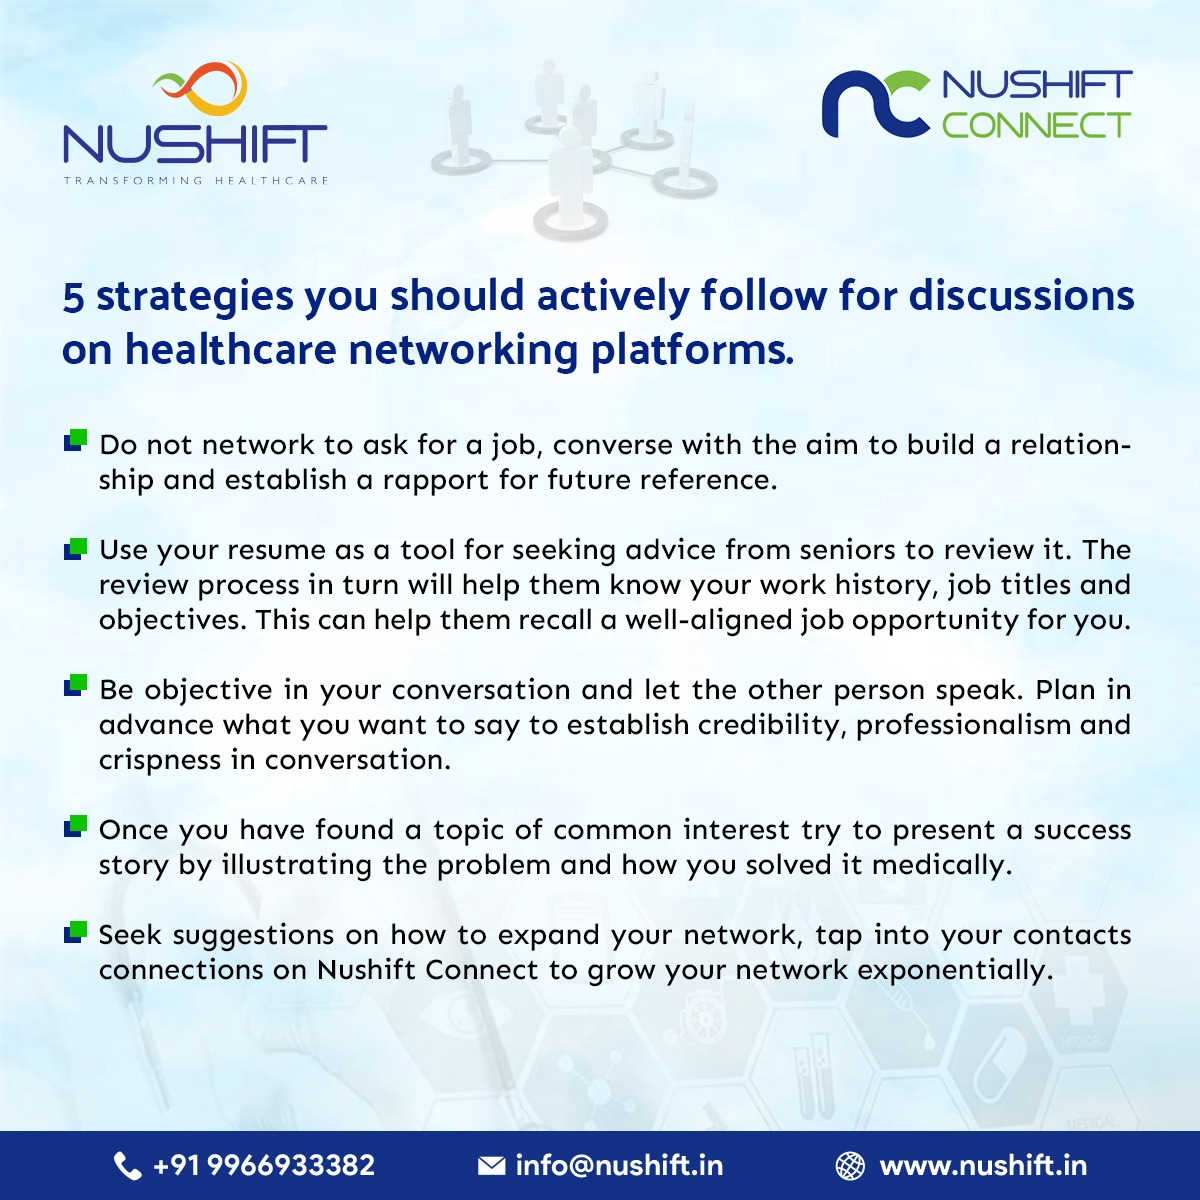 5 strategies you should actively follow for discussions on healthcare networking platforms. 

#healthcarenetworking #healthcaretechnology #networkingplatforms #socialnetwork #purposeofnetworking #peopleofnetworking #processesofnetworking
#Nushiftconnect #healthcareprofessional